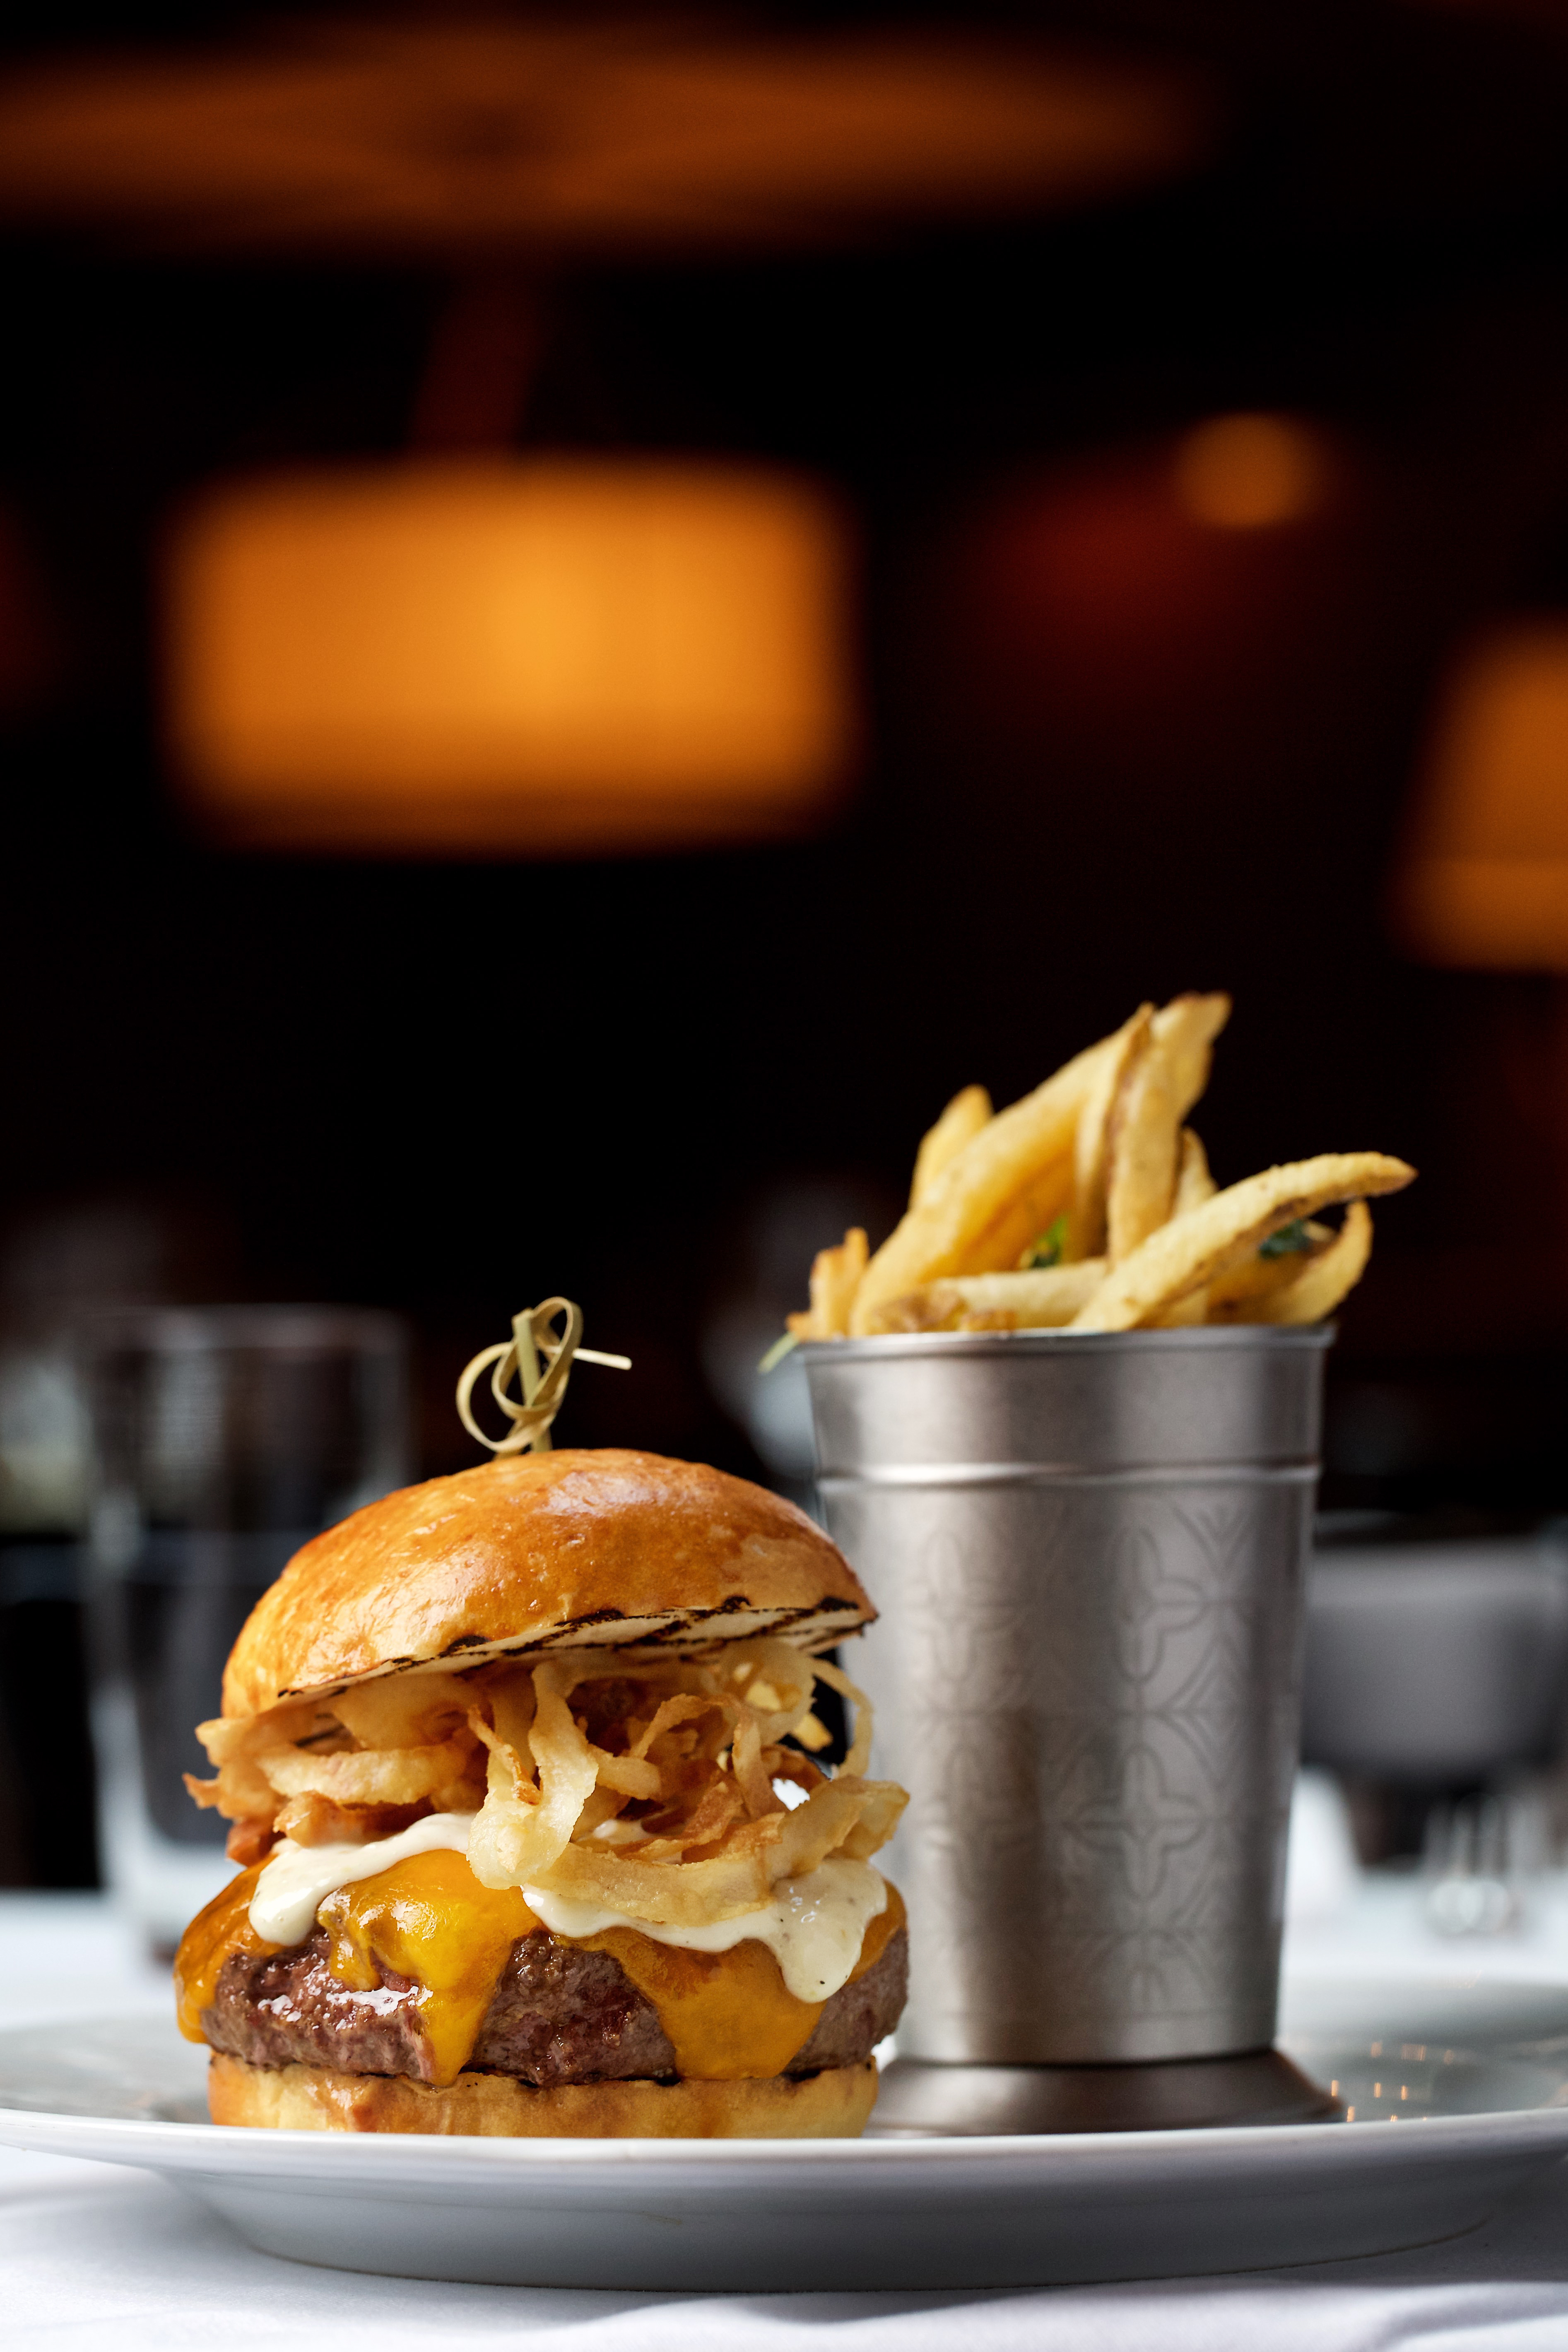 A Schlow Burger with cheddar, horseradish, and crispy onions from the Riggsby